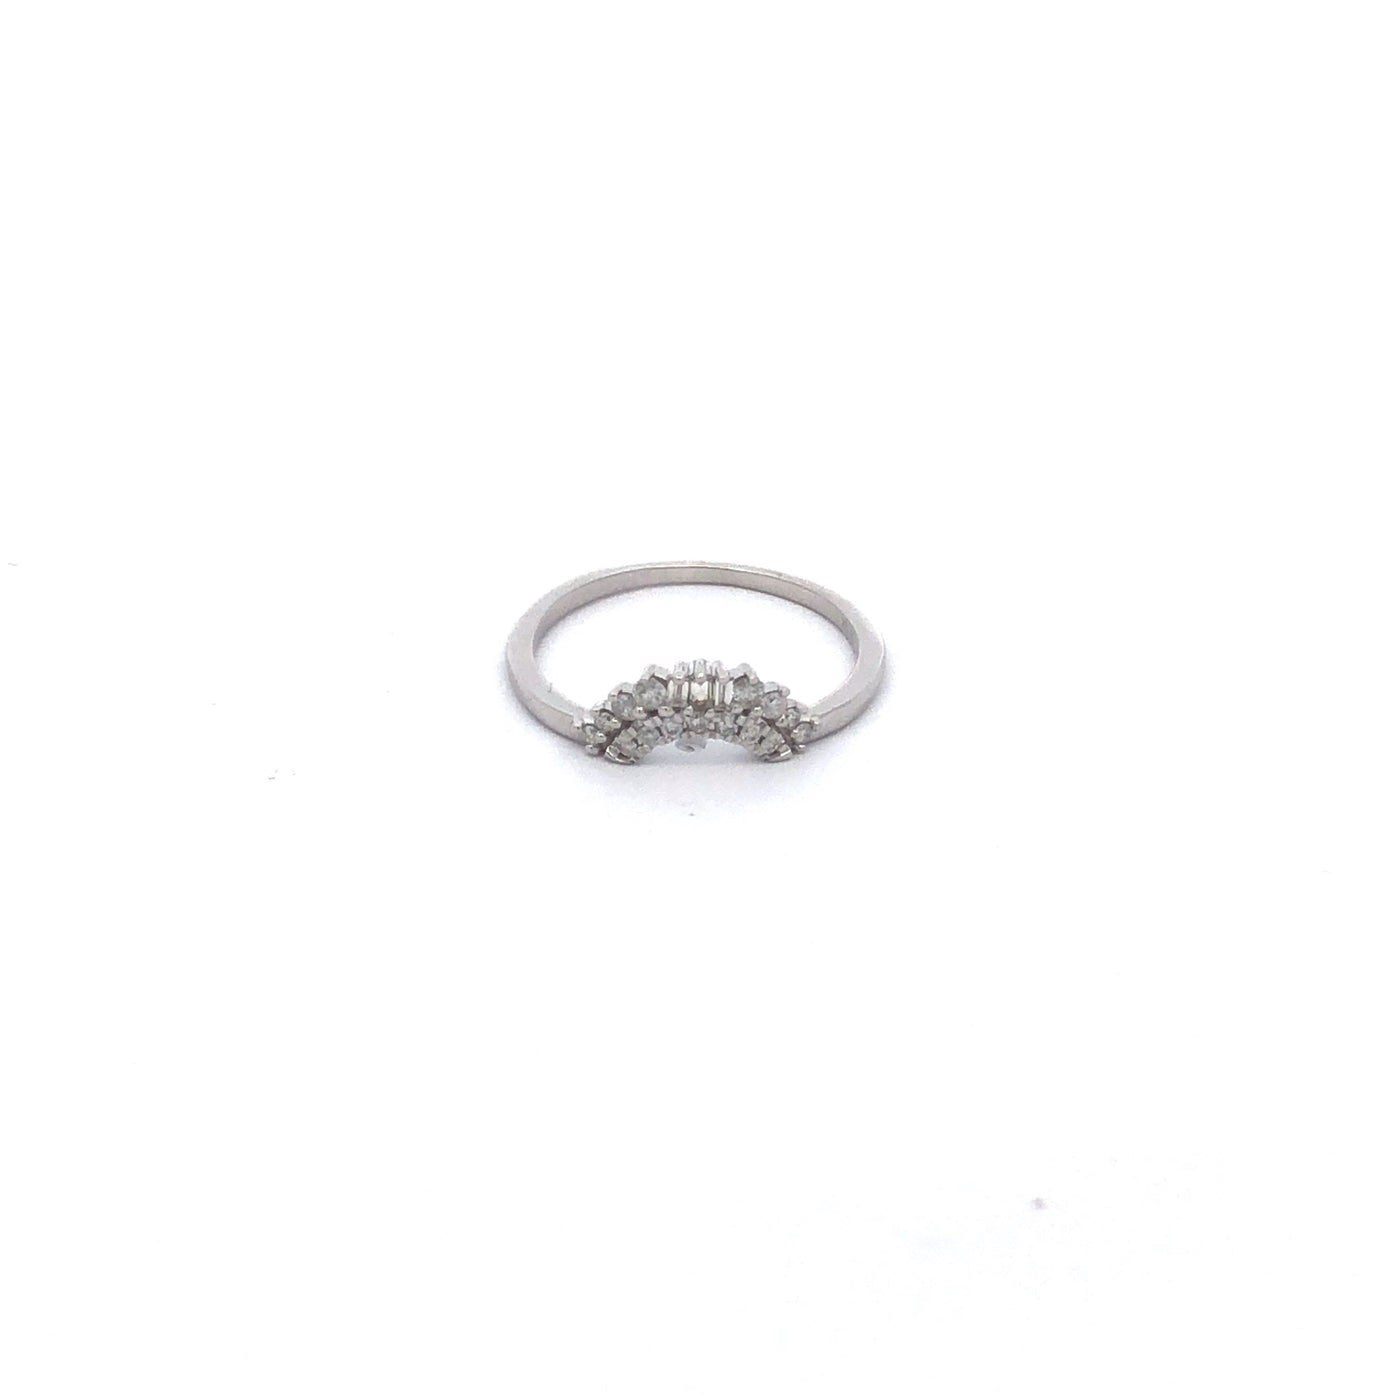 10Ct White Shaped Baguette And Brilliant Diamond Ring. Tdw=0.15Ct